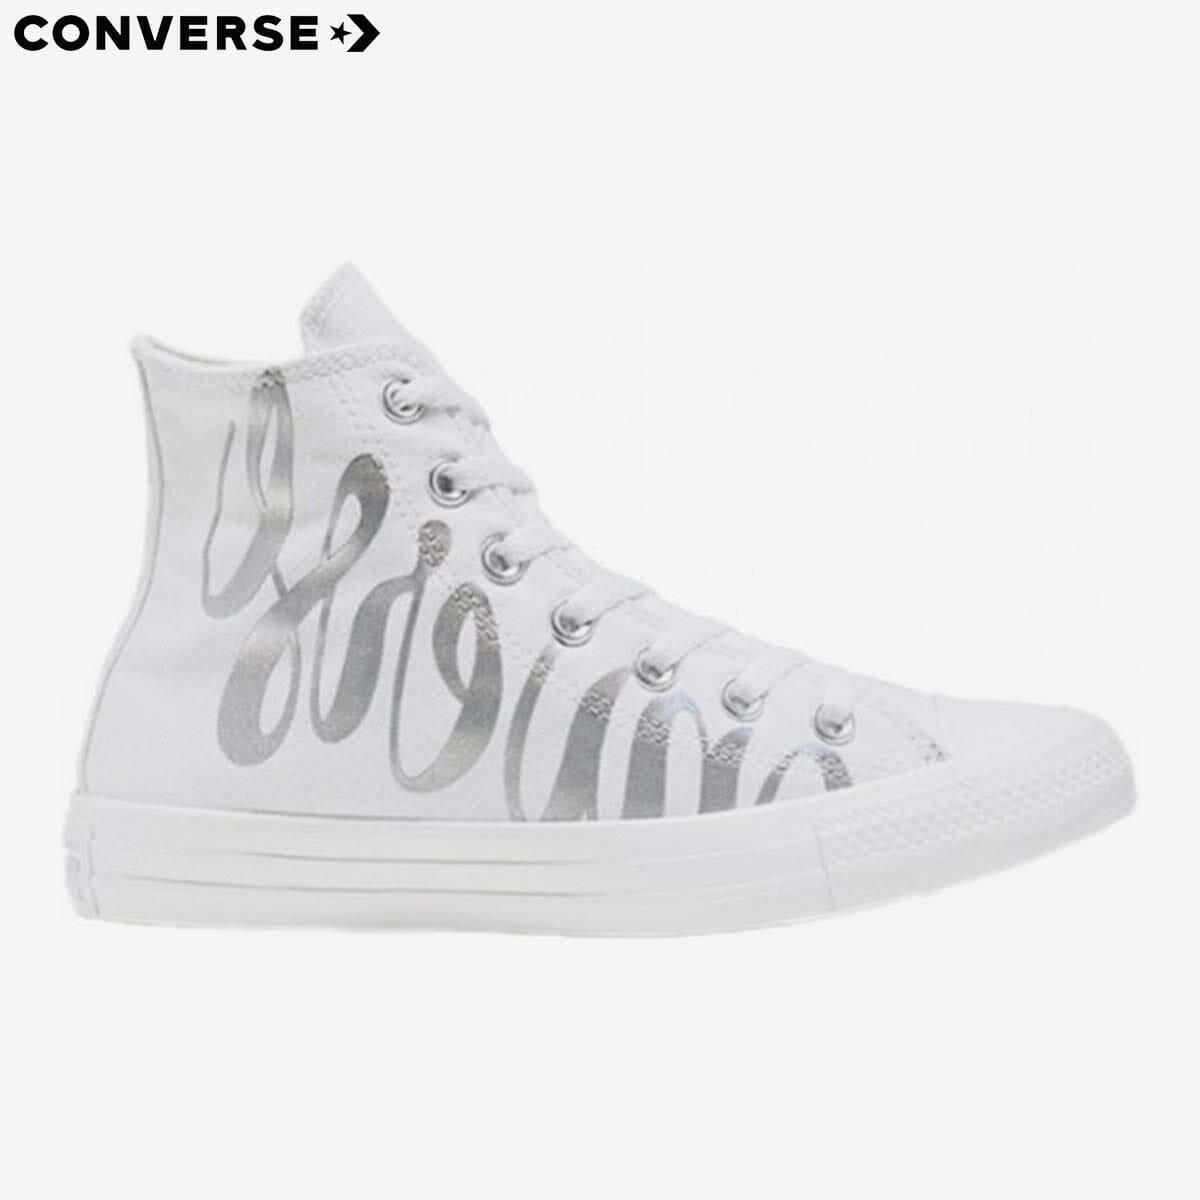 converse chuck taylor all star hi white multi white sneakers for